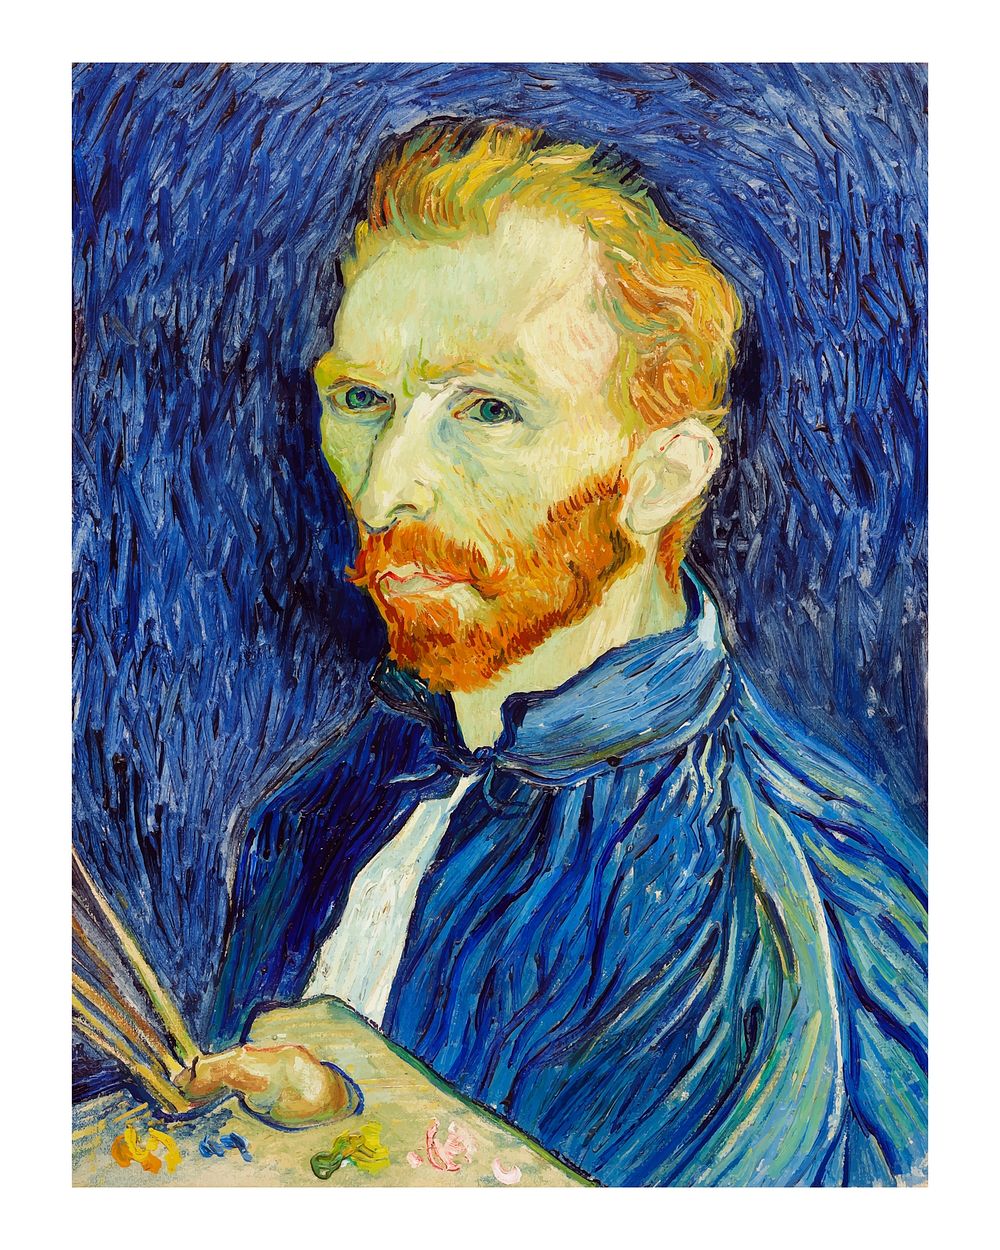 Self-portrait illustration wall art print and poster design remix from original painting by Vincent Van Gogh. Digitally…